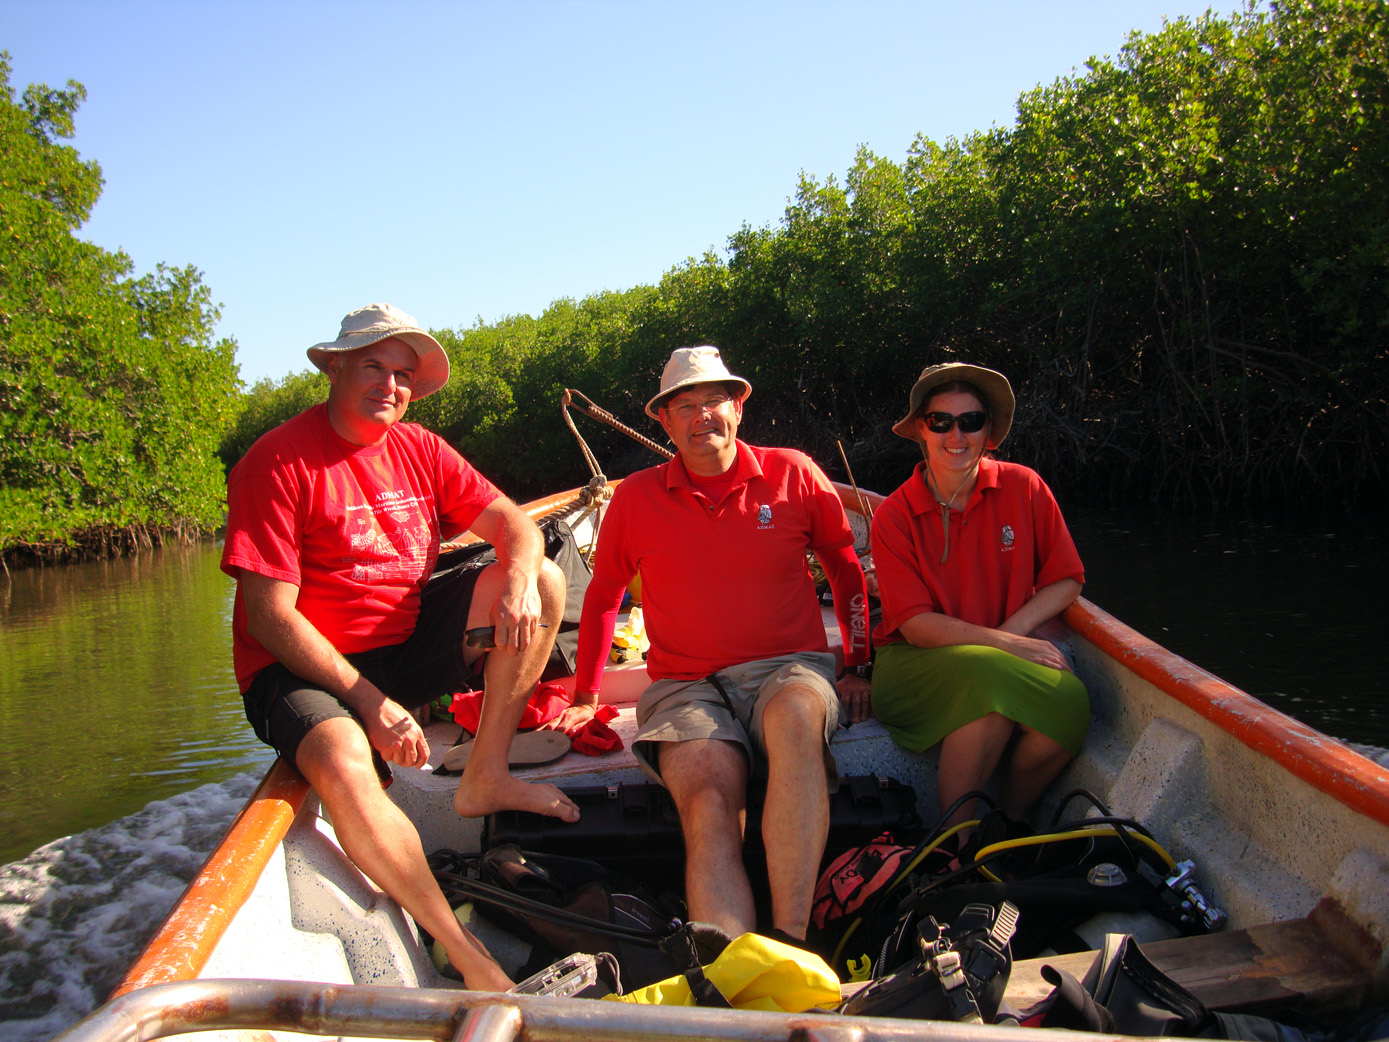  Raimund Krob, Dr Simon Spooner and Nikki Bose on the way to   The Tile Wreck   in 2013 